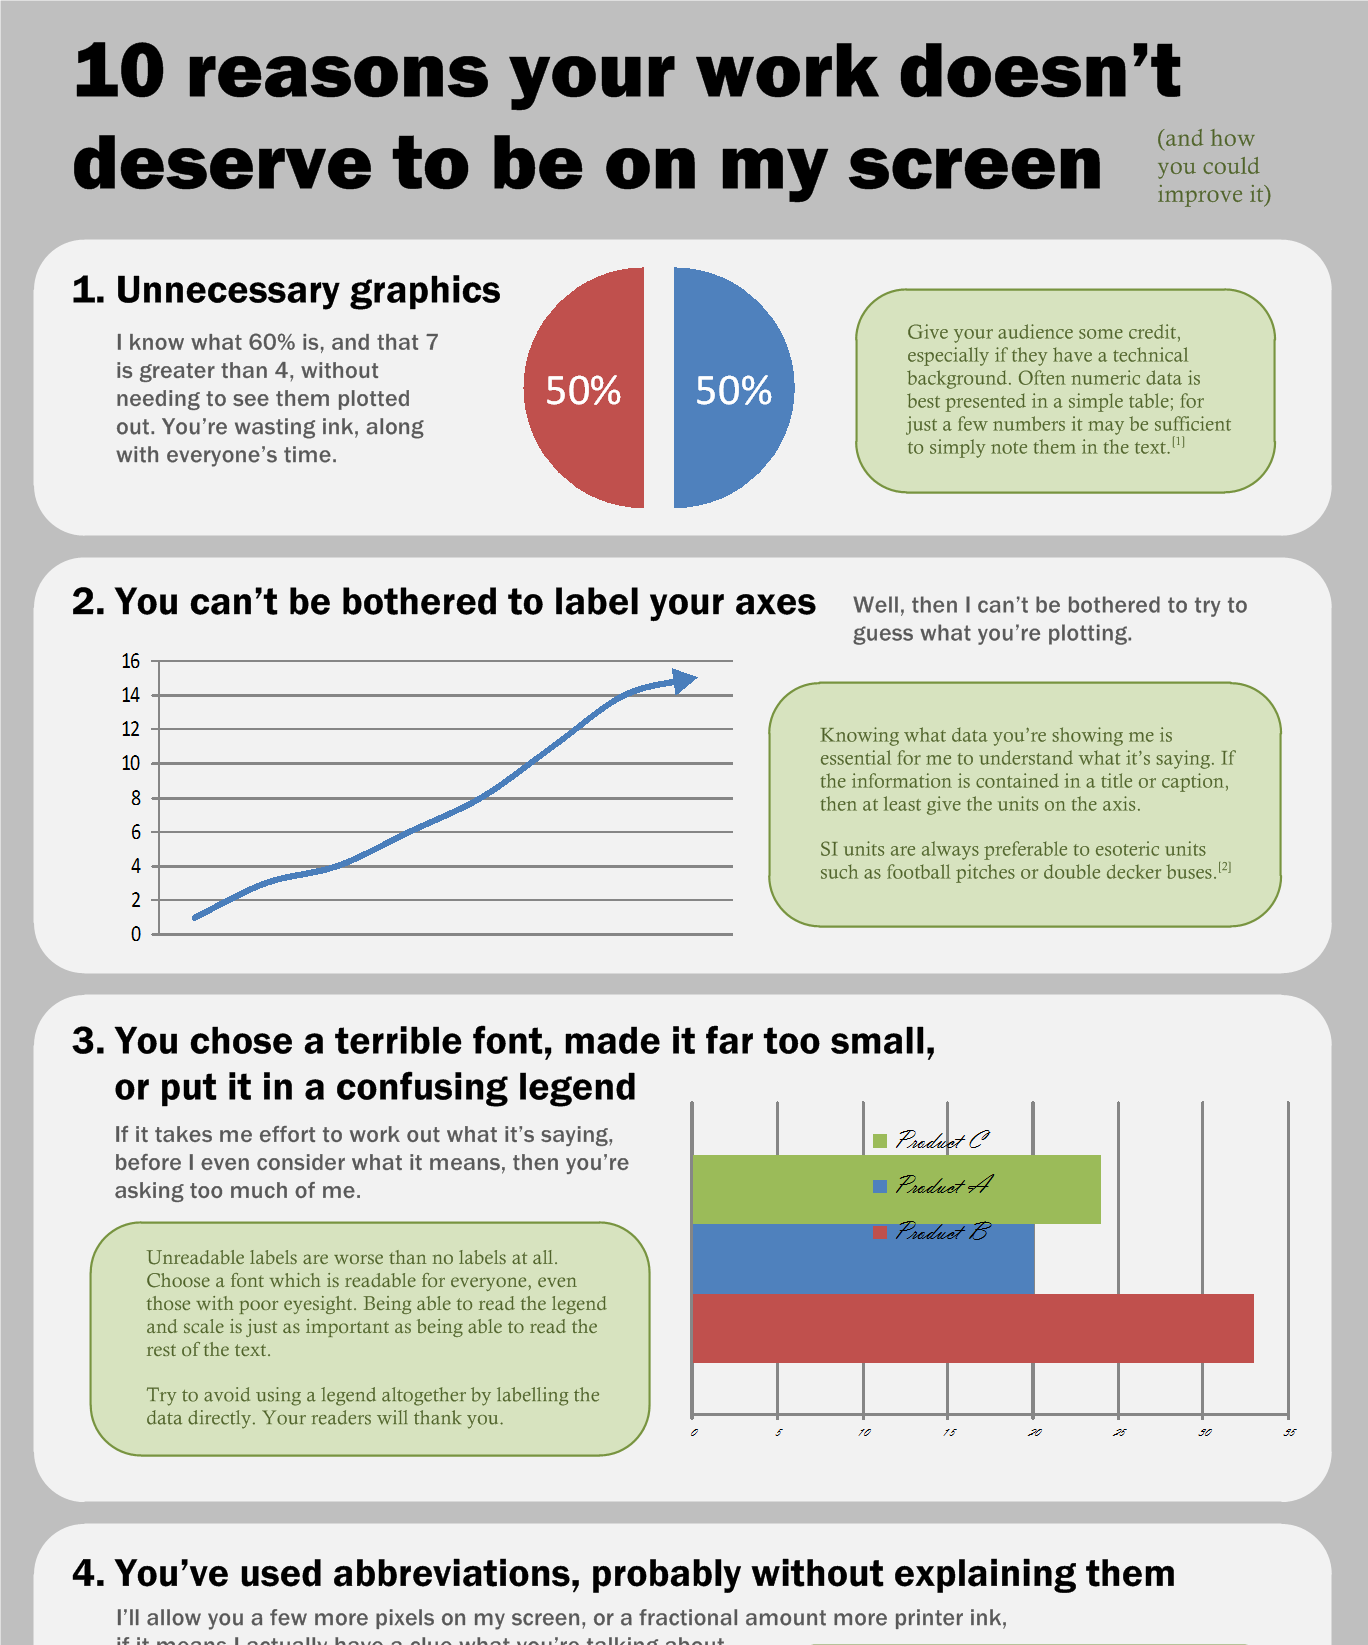 10 reasons your work doesn't deserve to be on my screen